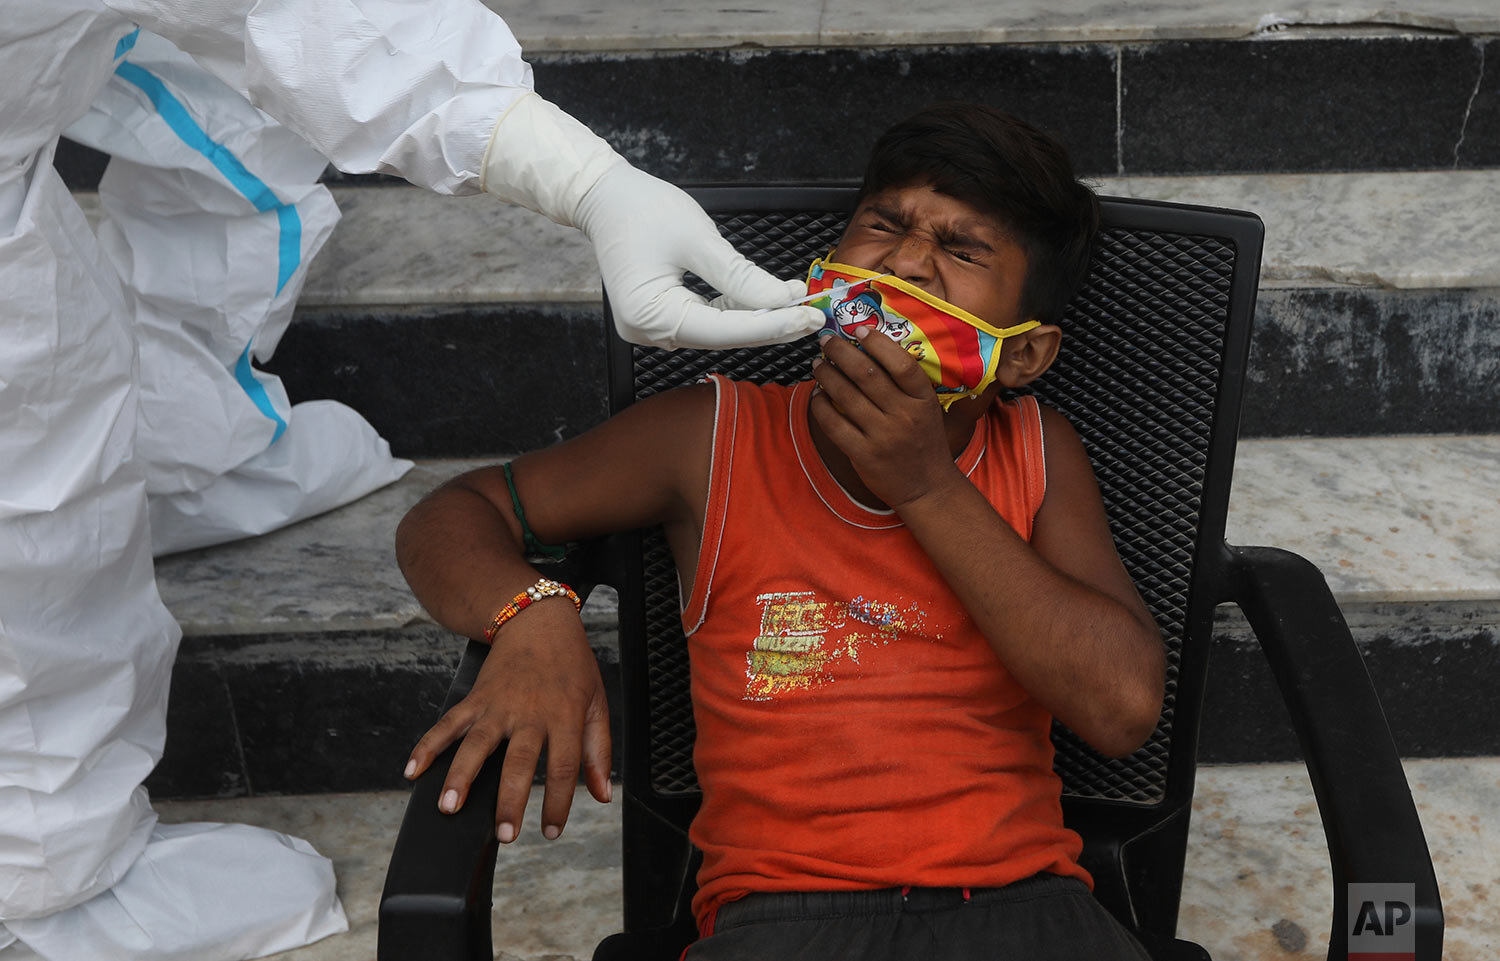  A child grimaces as a health worker takes a nasal swab sample for COVID- 19 testing through rapid antigen methodology, in New Delhi, India , Friday, Aug. 7, 2020. (AP Photo/Manish Swarup) 